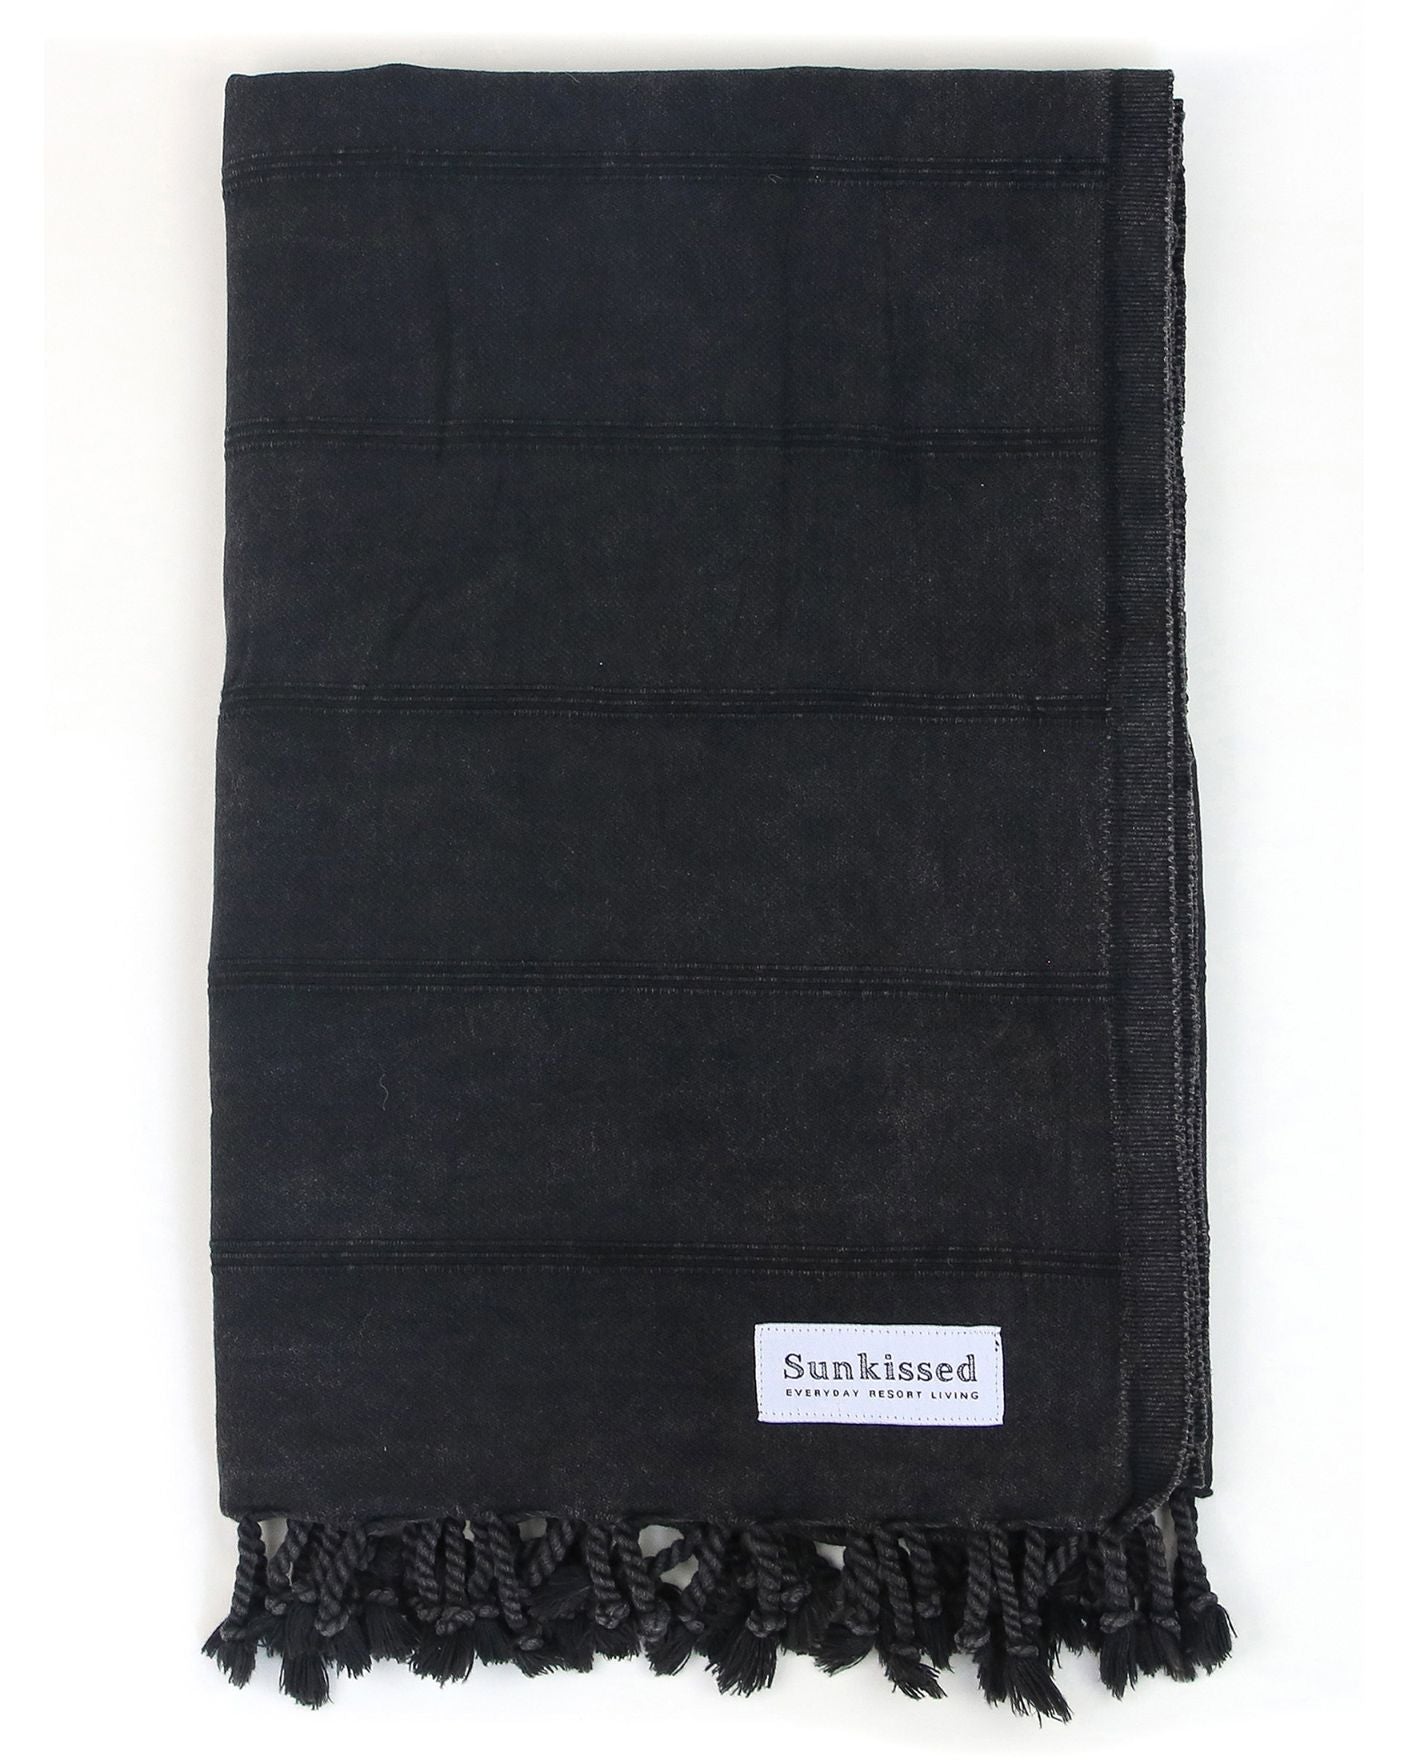  Bali • Sand Free Beach Towel by Sunkissed Sunkissed Perfumarie